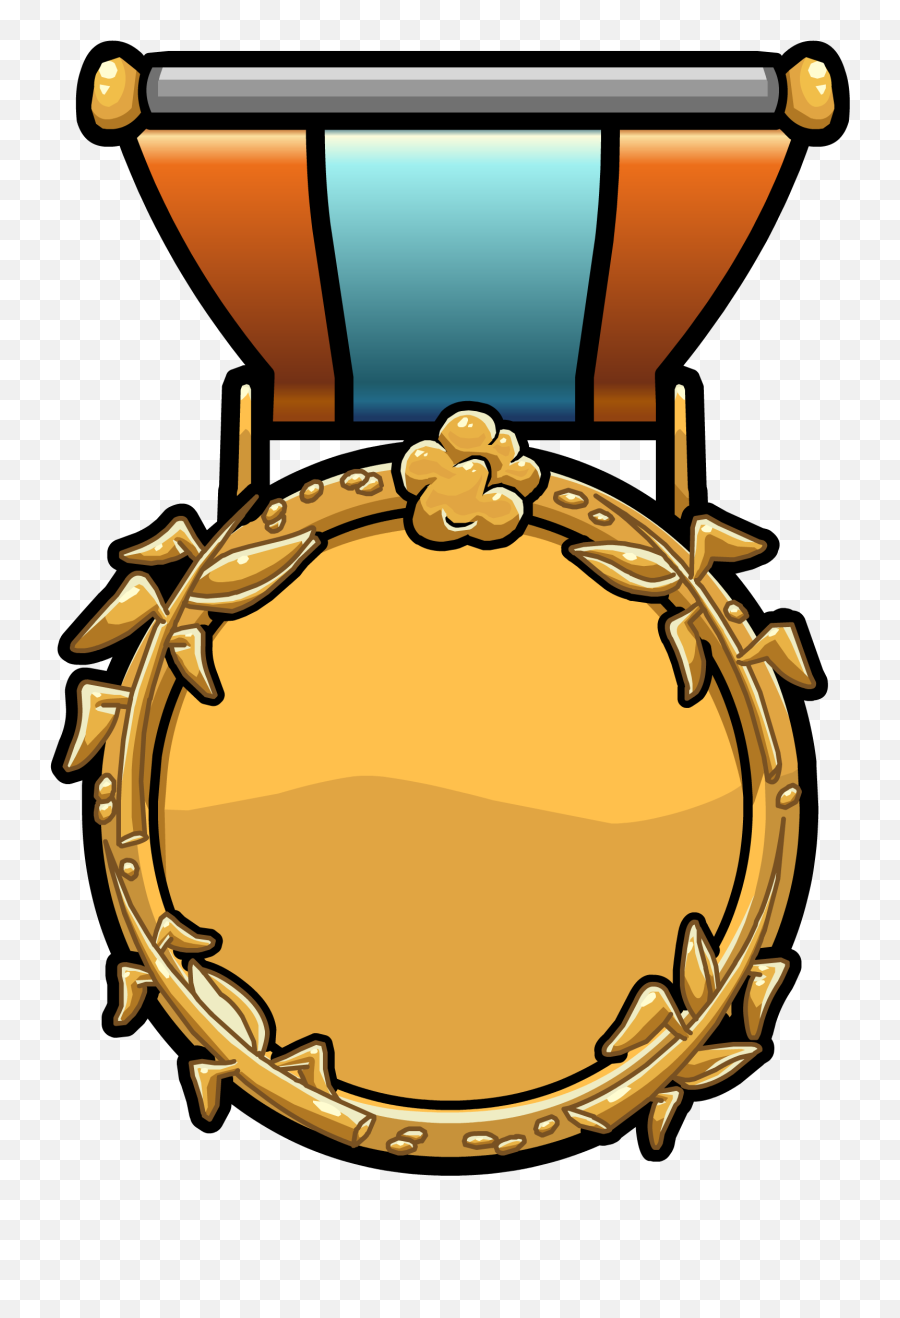 Club Penguin Rewritten Wiki - Medal And Mission Feedback 2 Medals And A Mission Template Emoji,Missions Clipart